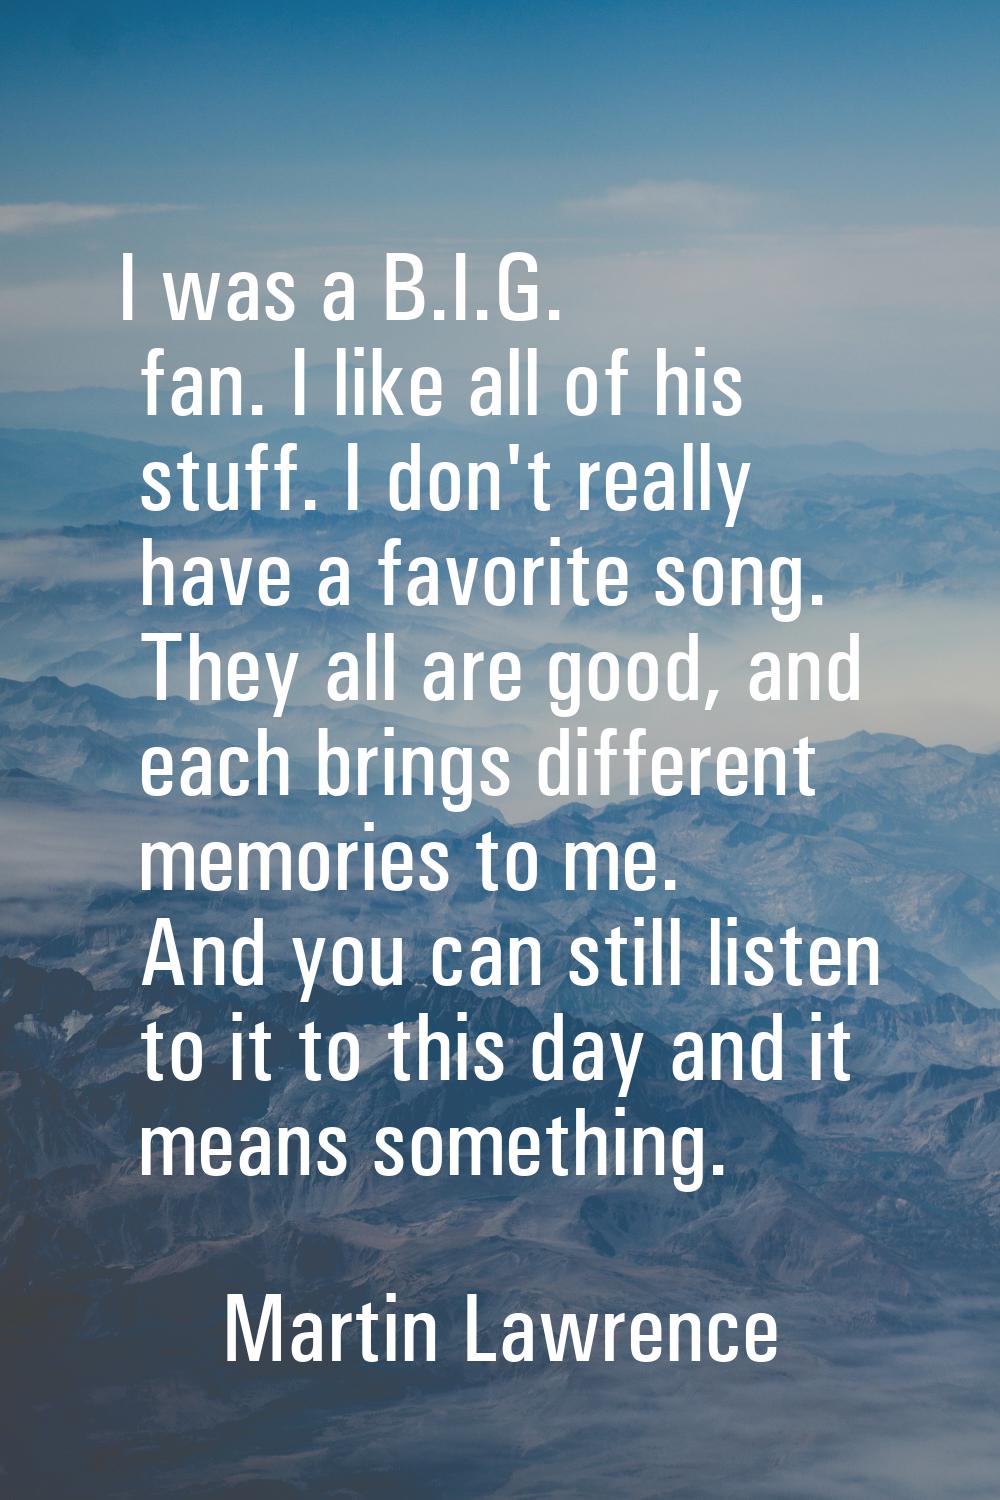 I was a B.I.G. fan. I like all of his stuff. I don't really have a favorite song. They all are good